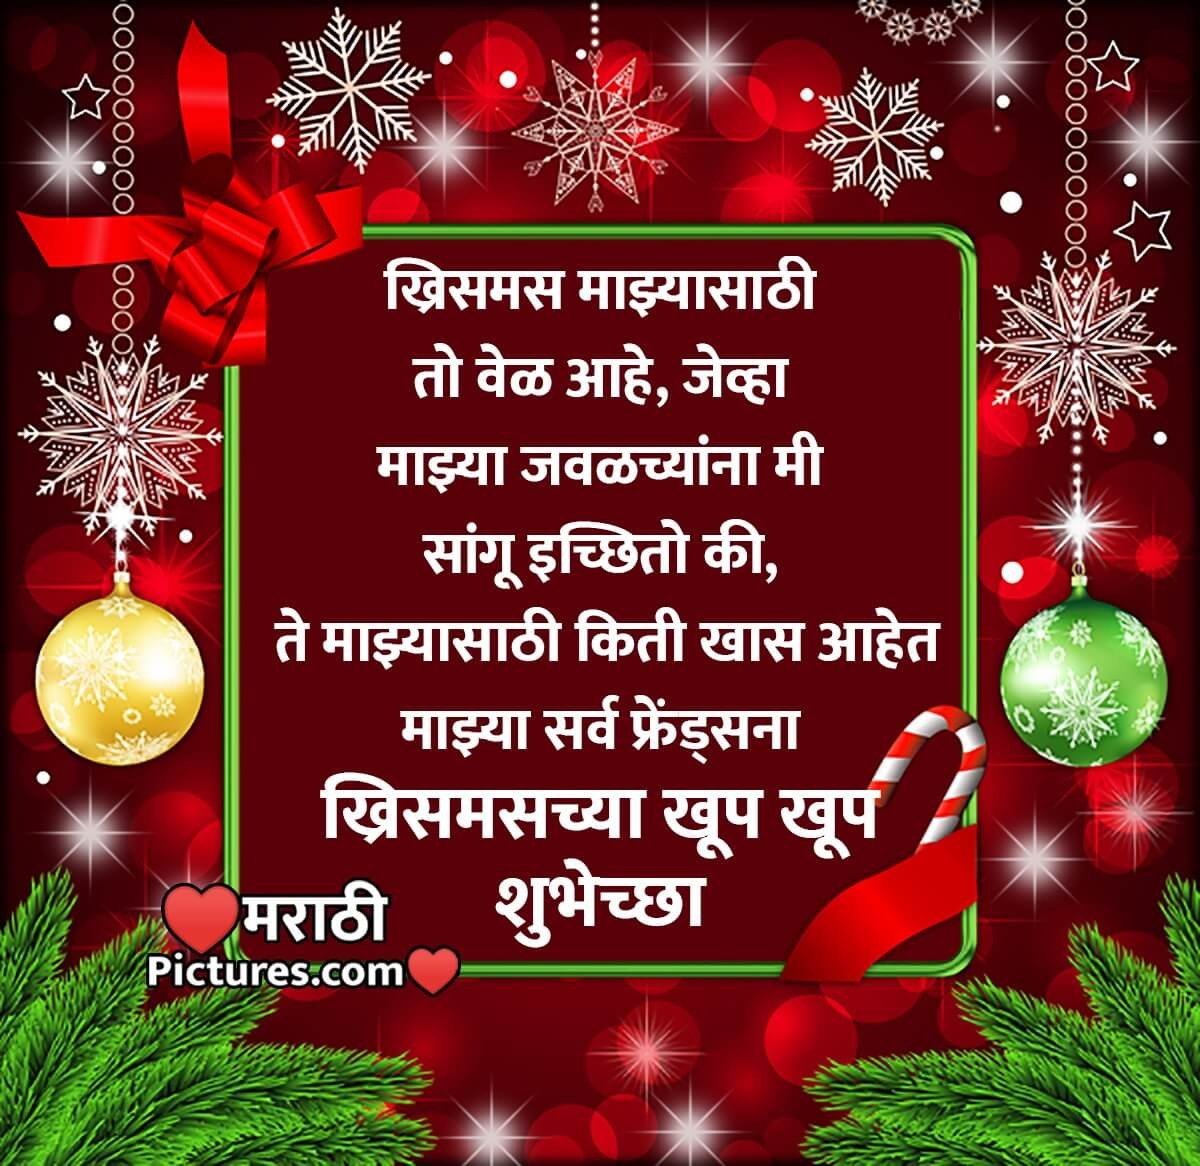 Merry Christmas Marathi Wishes For Friends